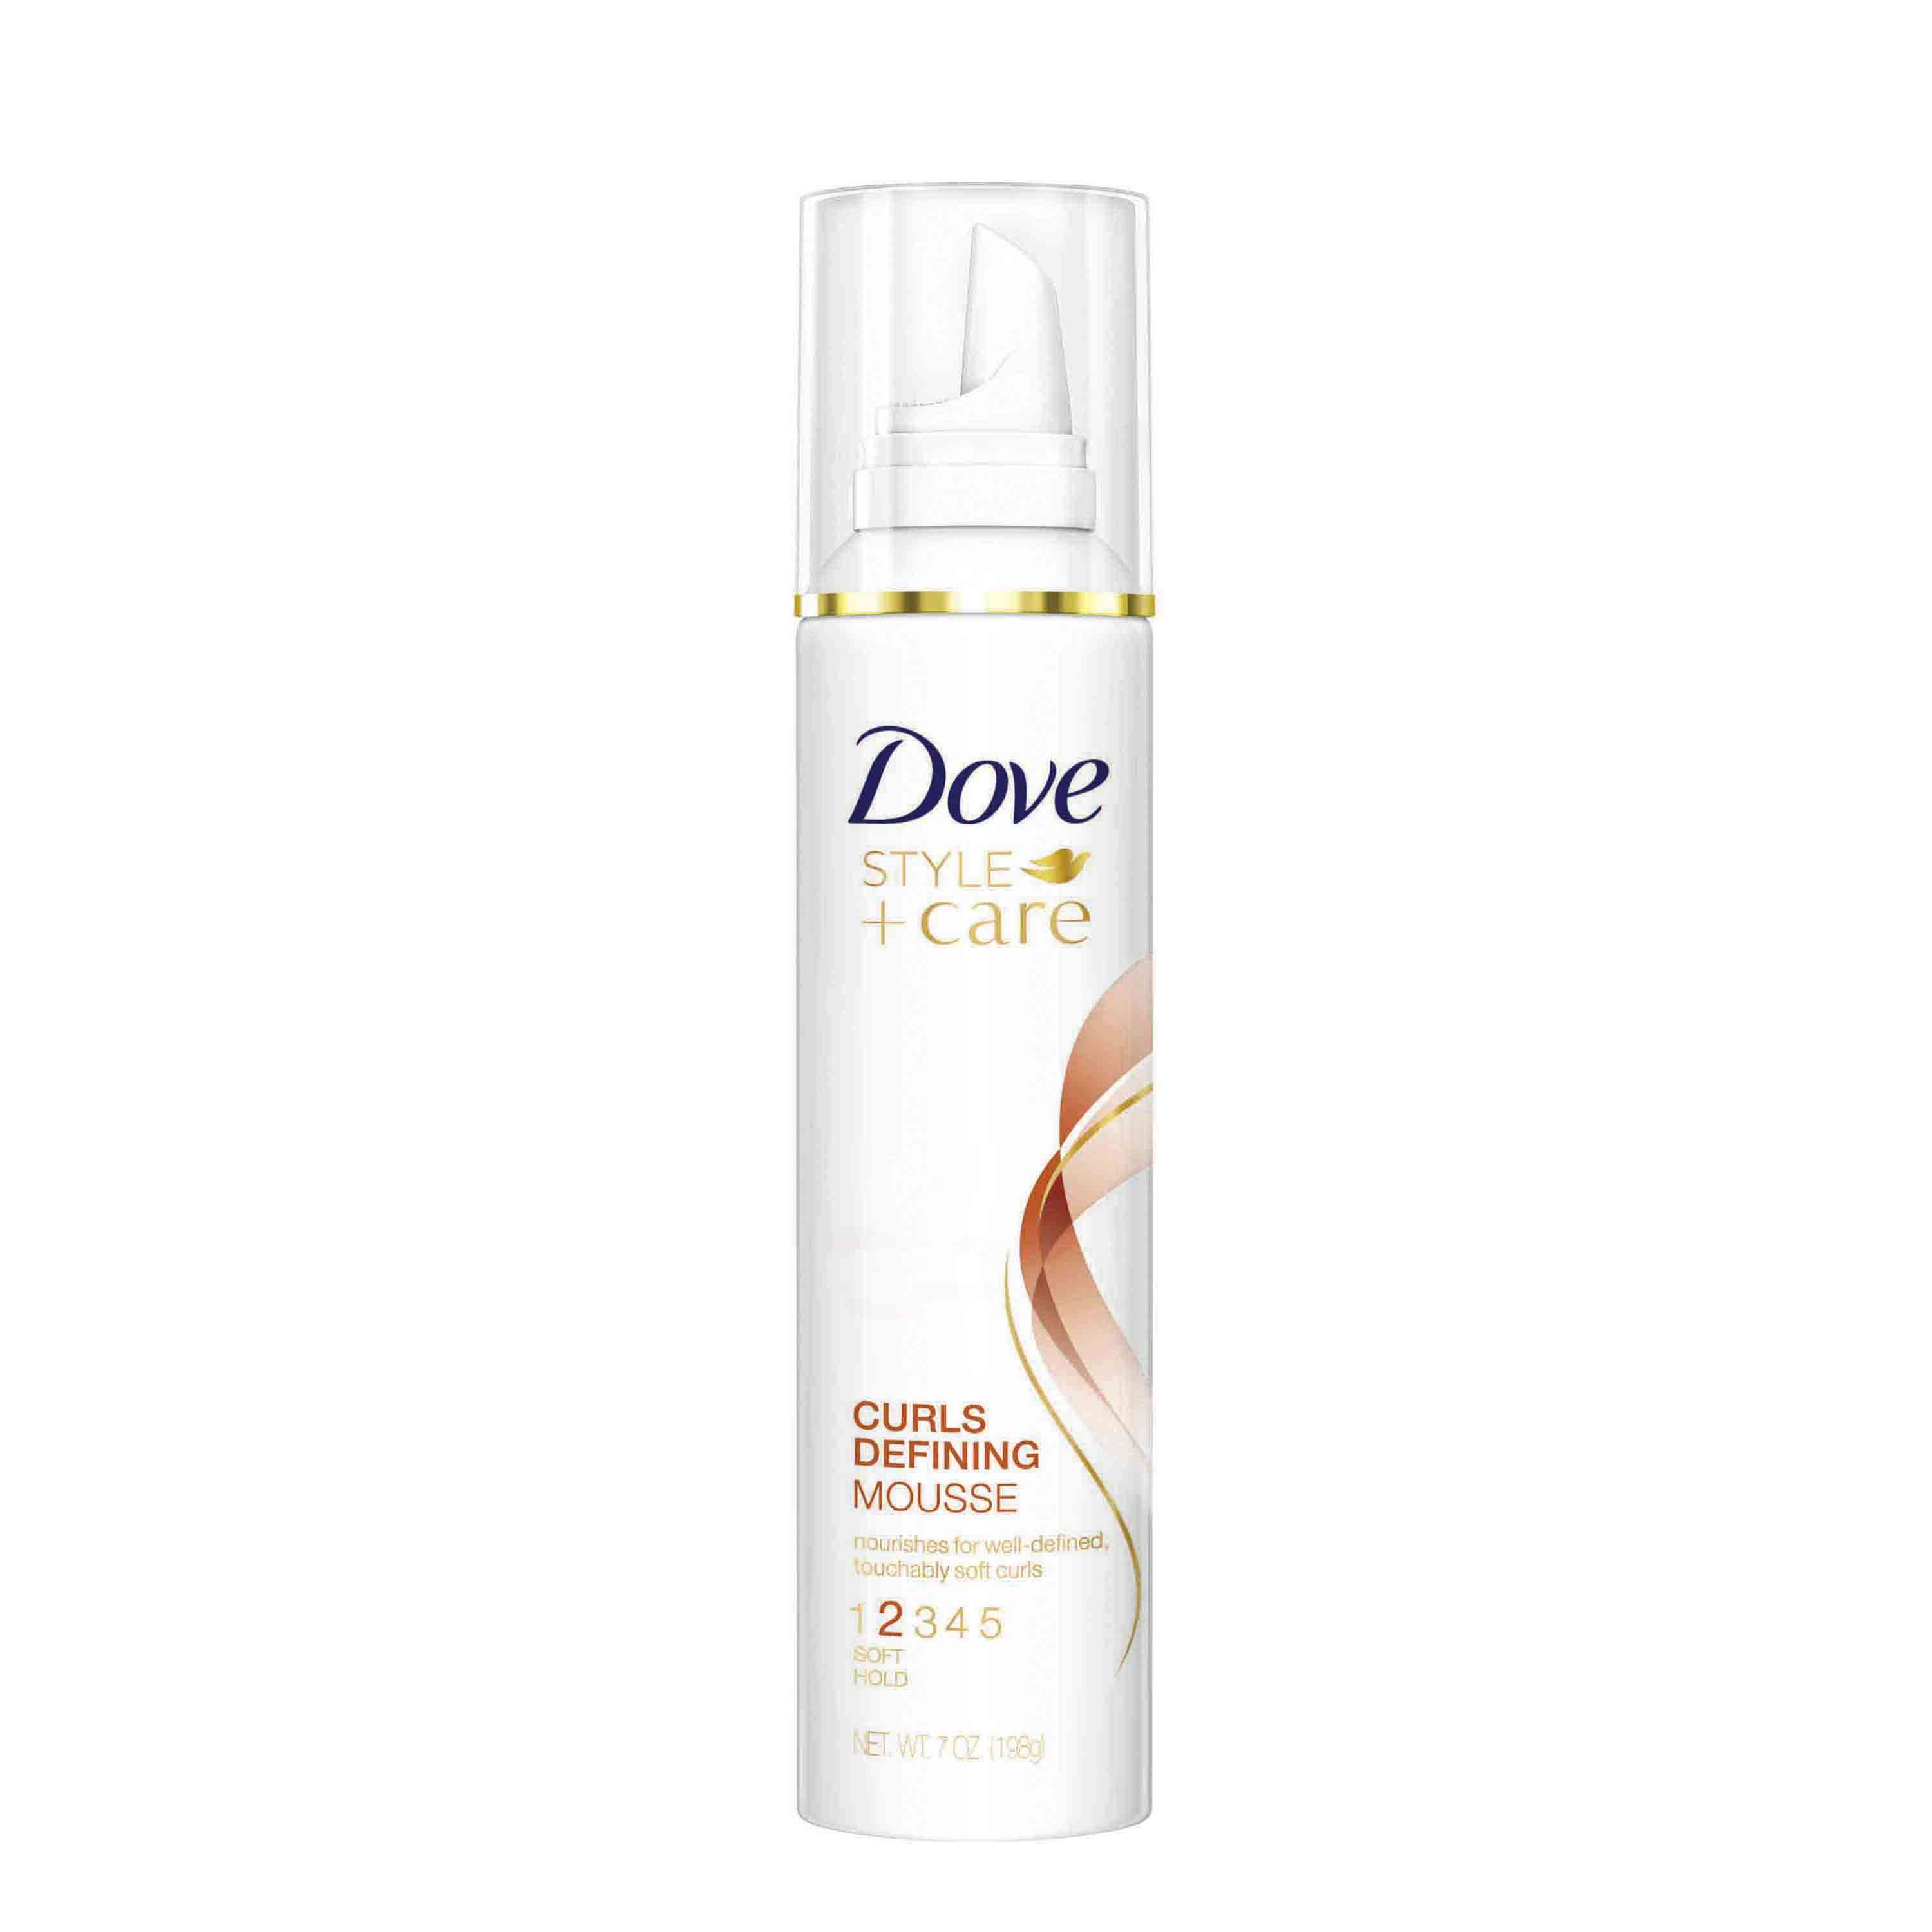 DOVE STYLE+CARE CURLS DEFINING MOUSSE